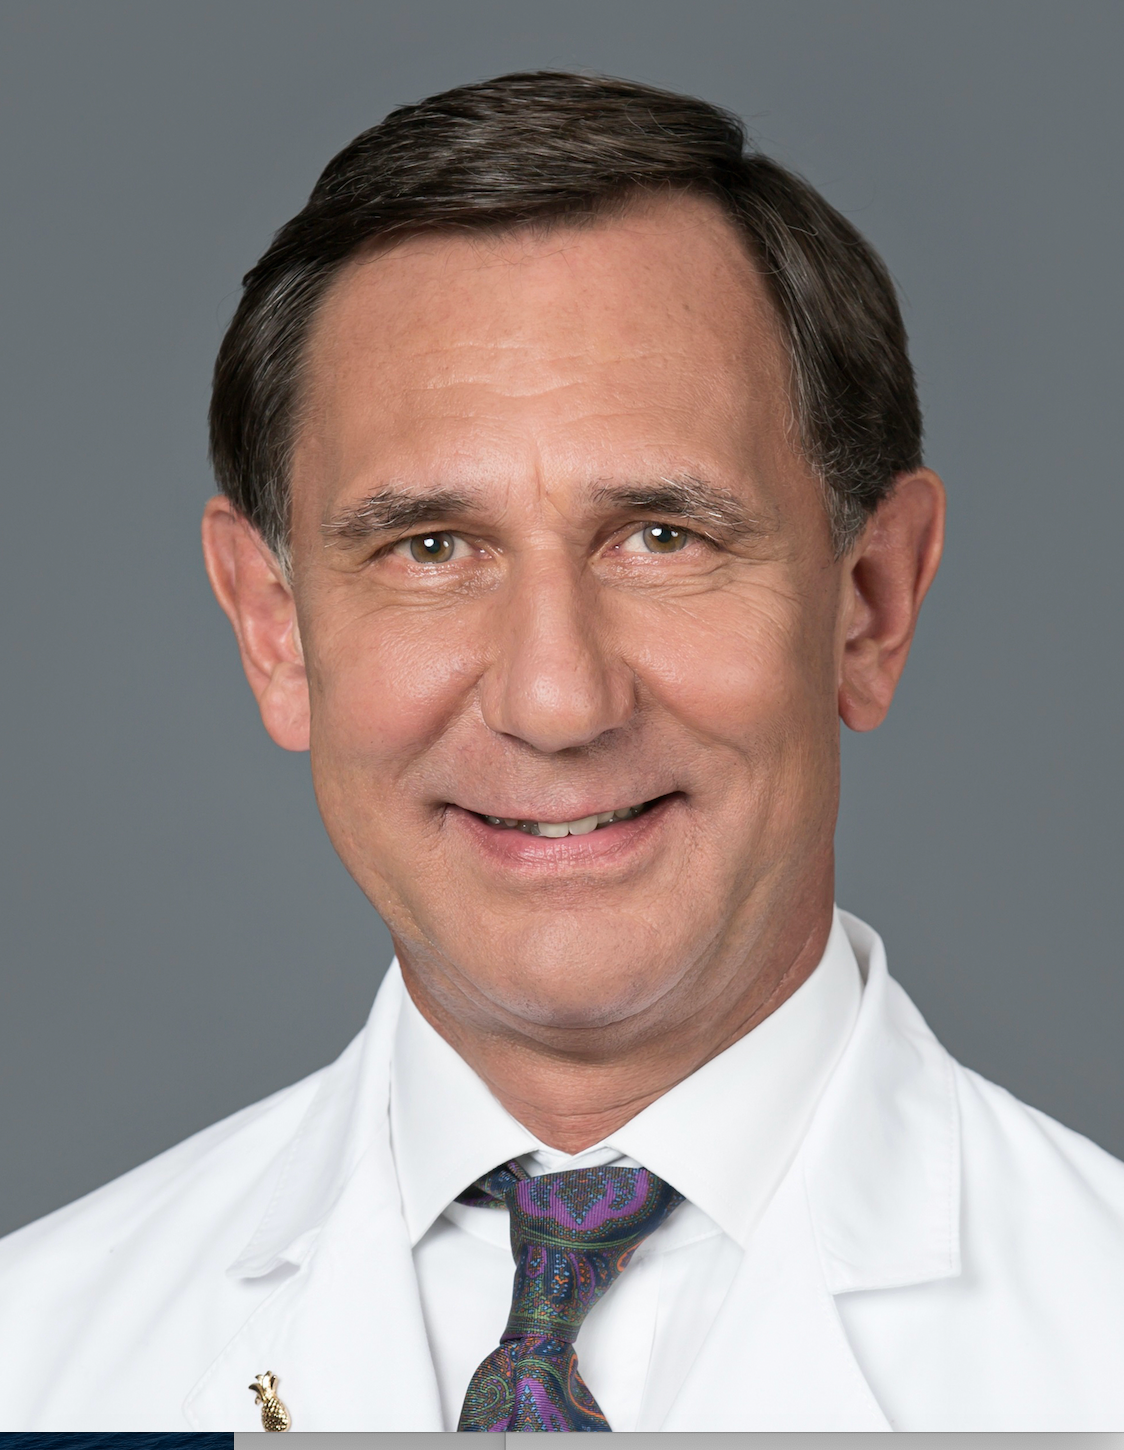 Guenther Koehne, MD, PhD